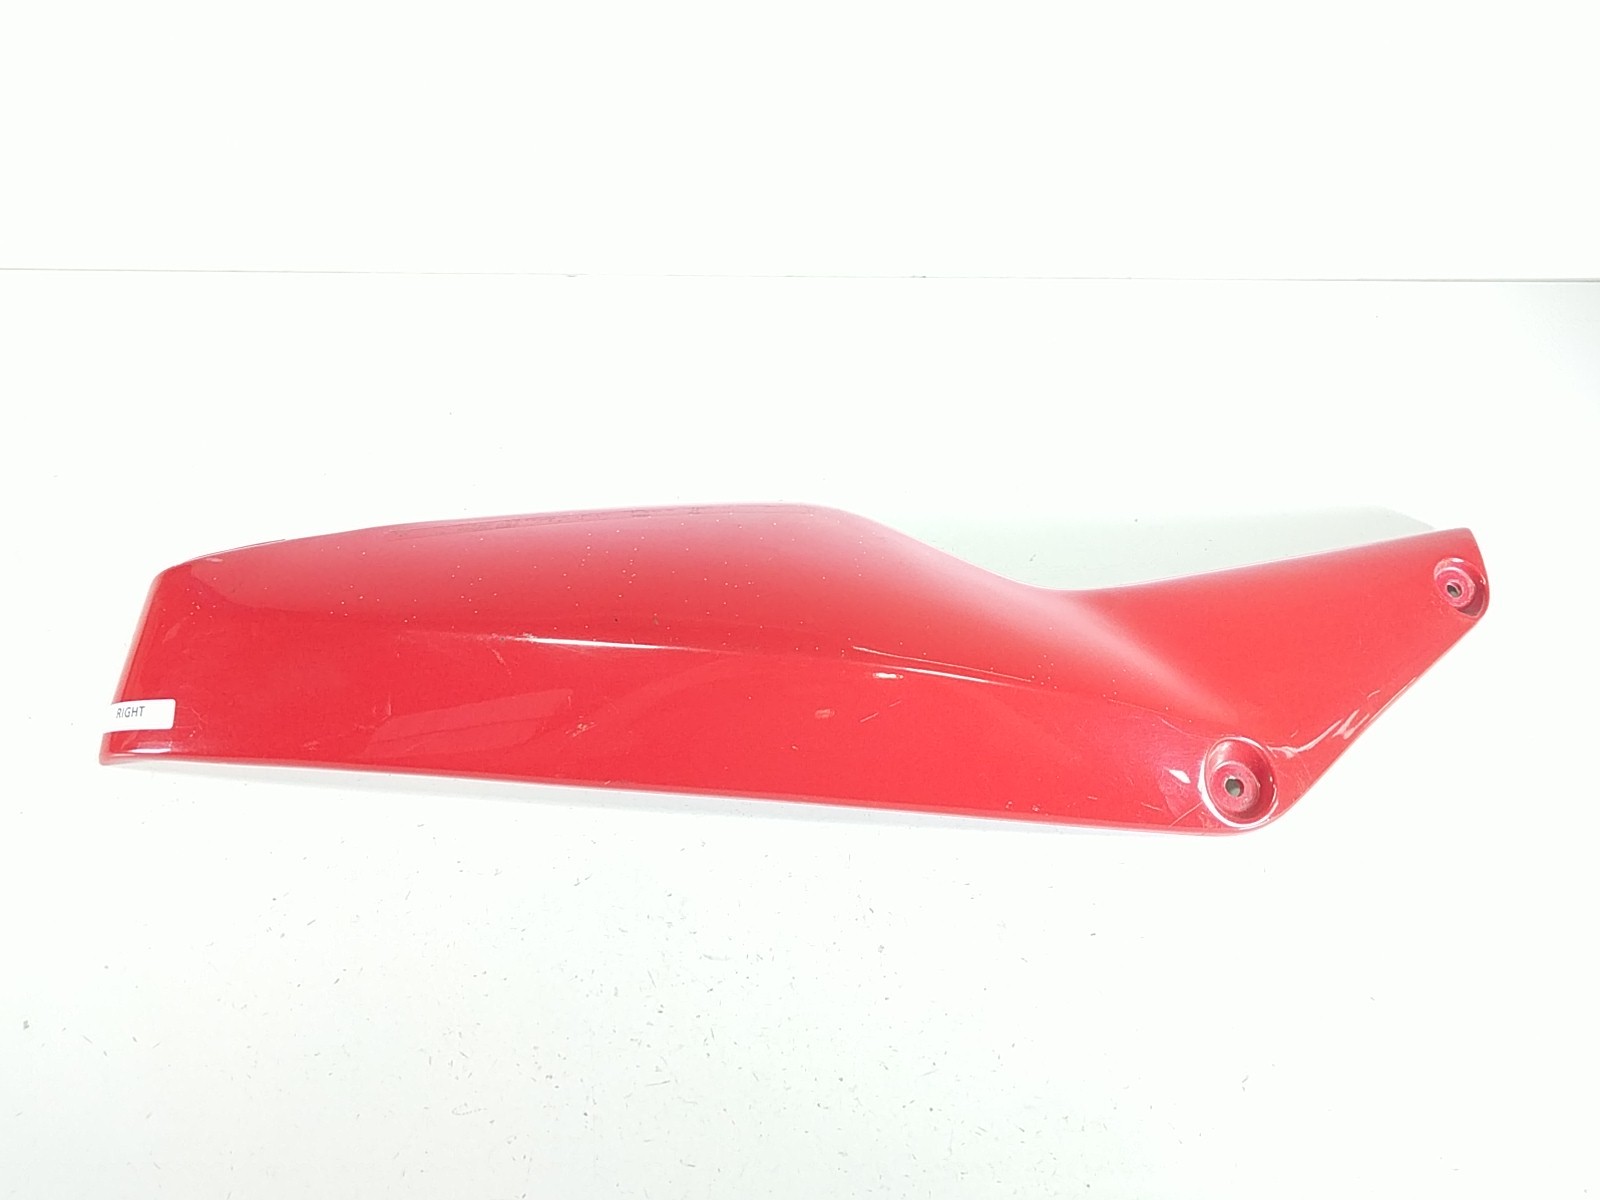 94 Ducati 900 SS Super Sport SP Right Rear Tail Fairing Cover Plastic DX-48230092A